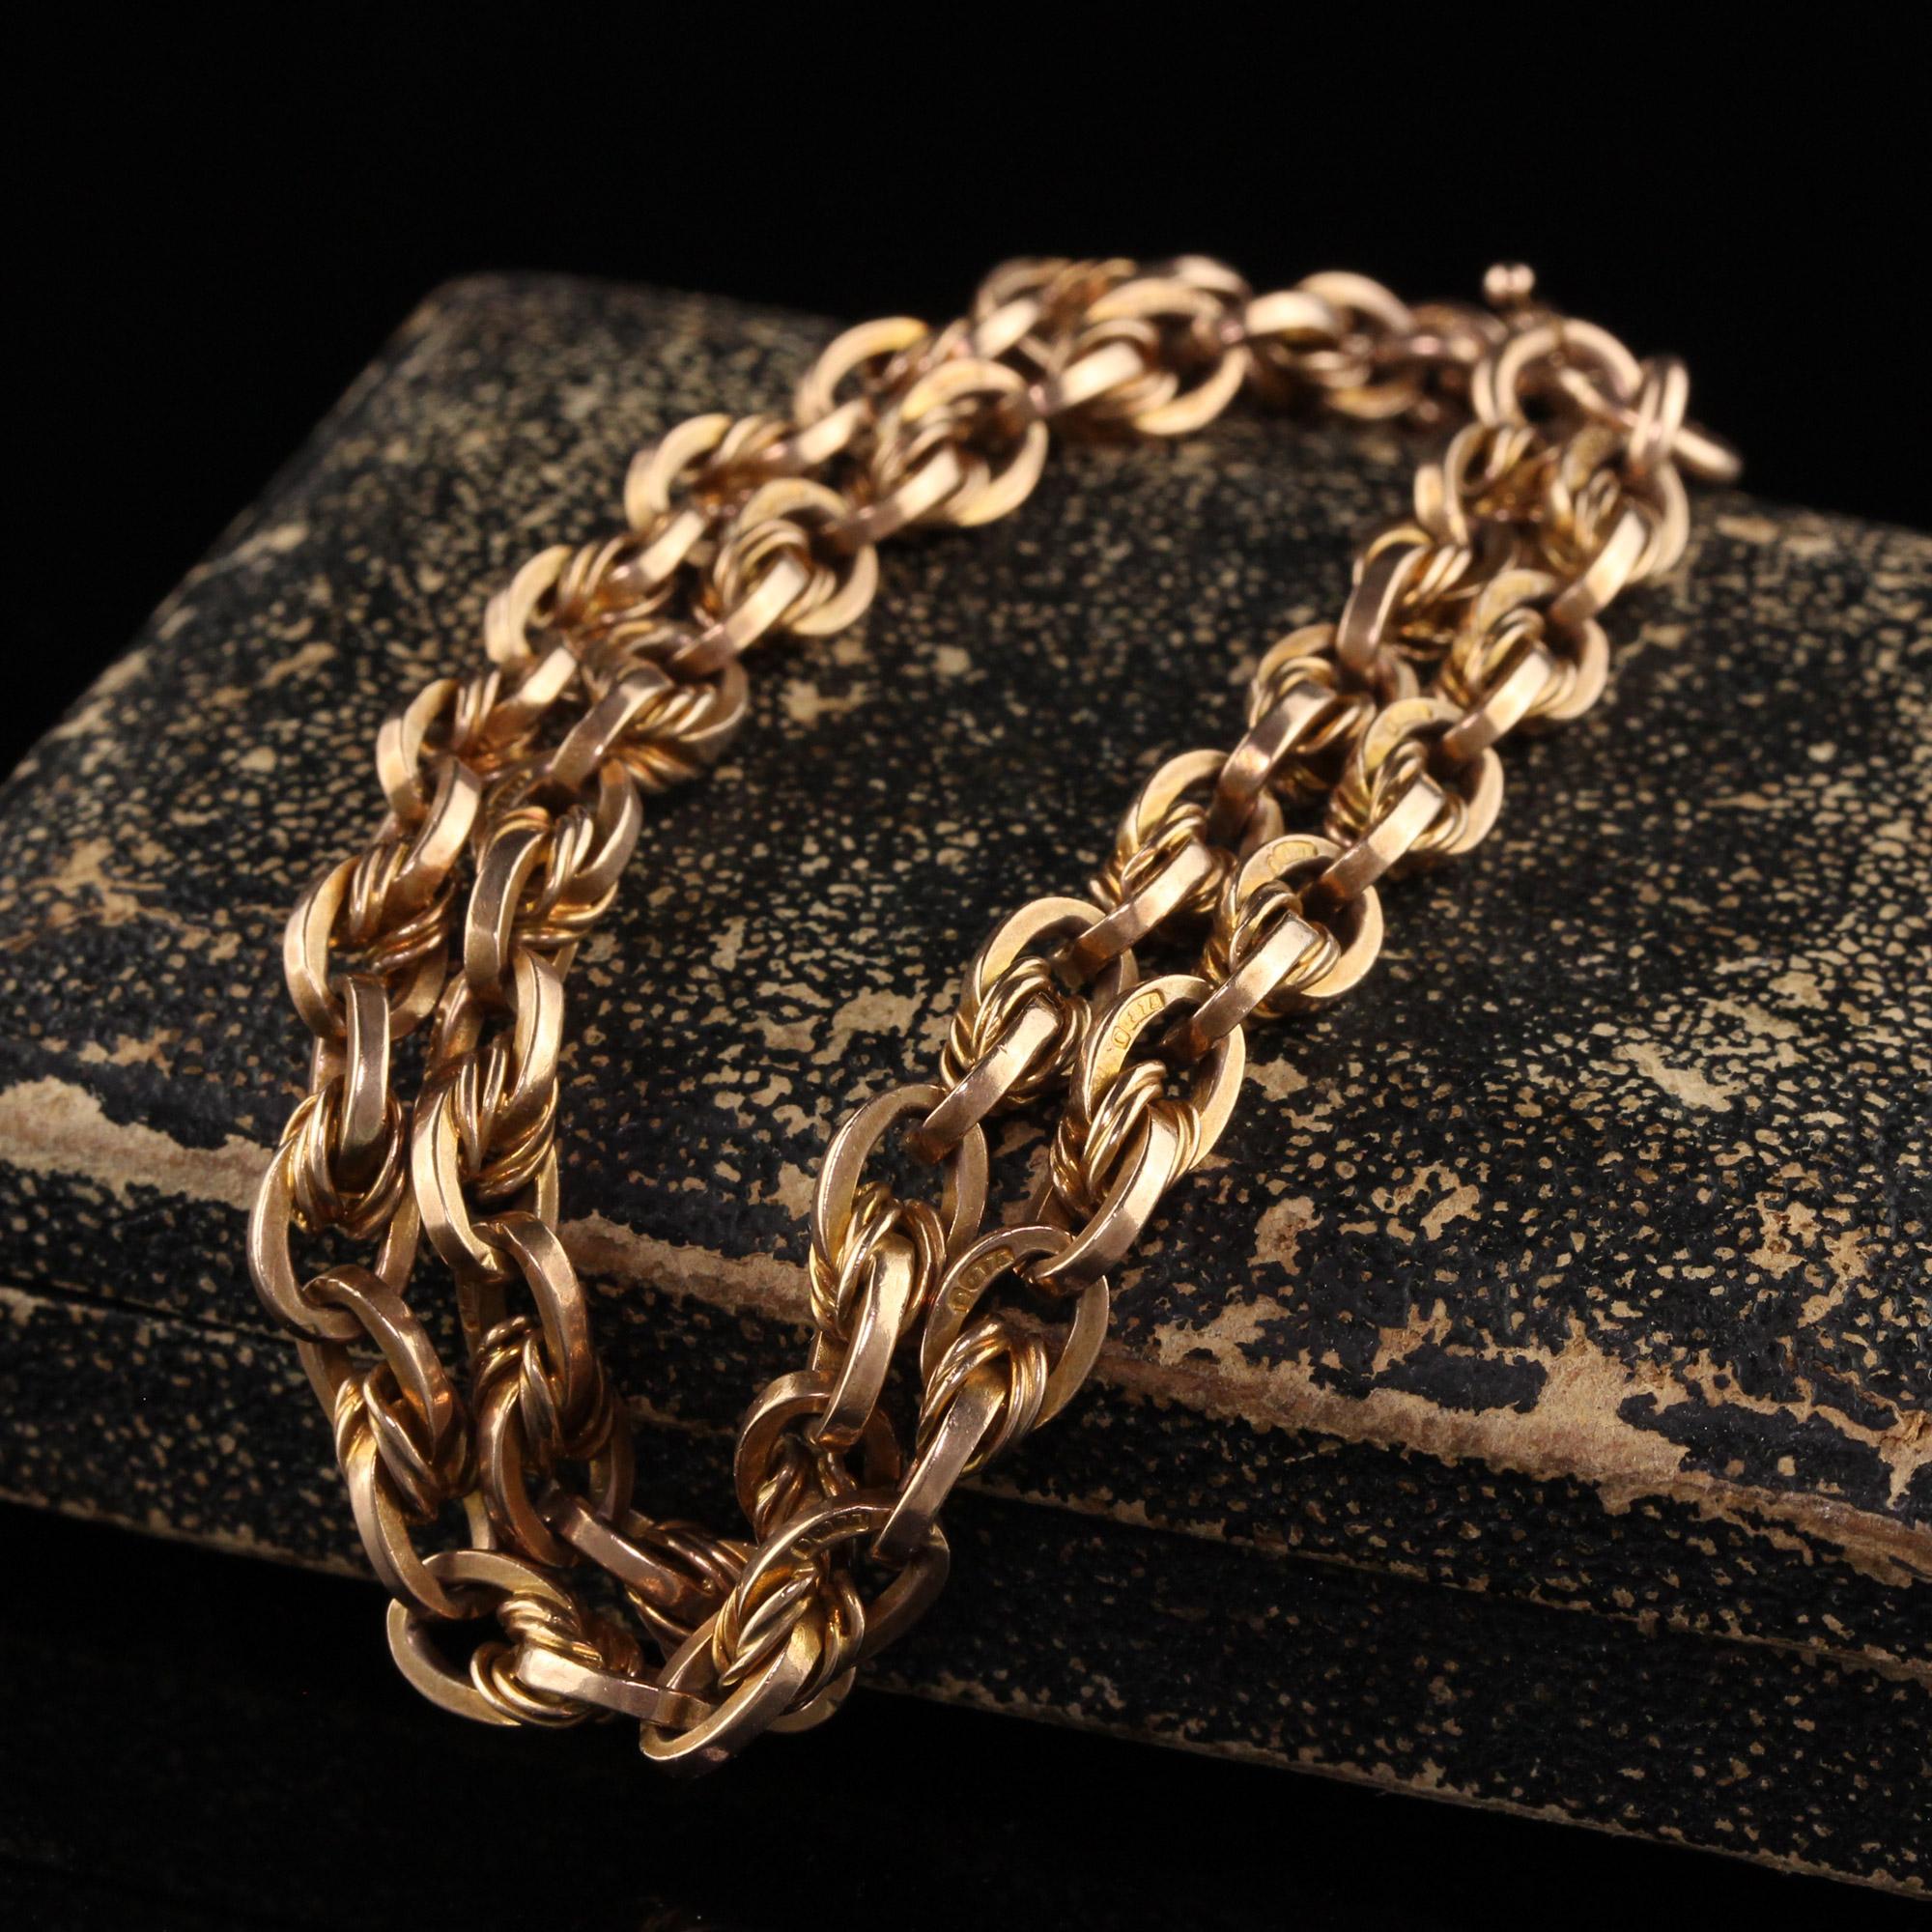 Beautiful Antique Victorian 9K Yellow Gold Twist Chain Bracelet. This beautiful bracelet is crafted in 9k yellow gold. Each link on the bracelet is marked .375 and it is in great condition.

Item #B0061

Metal: 9K Yellow Gold

Weight: 23.5